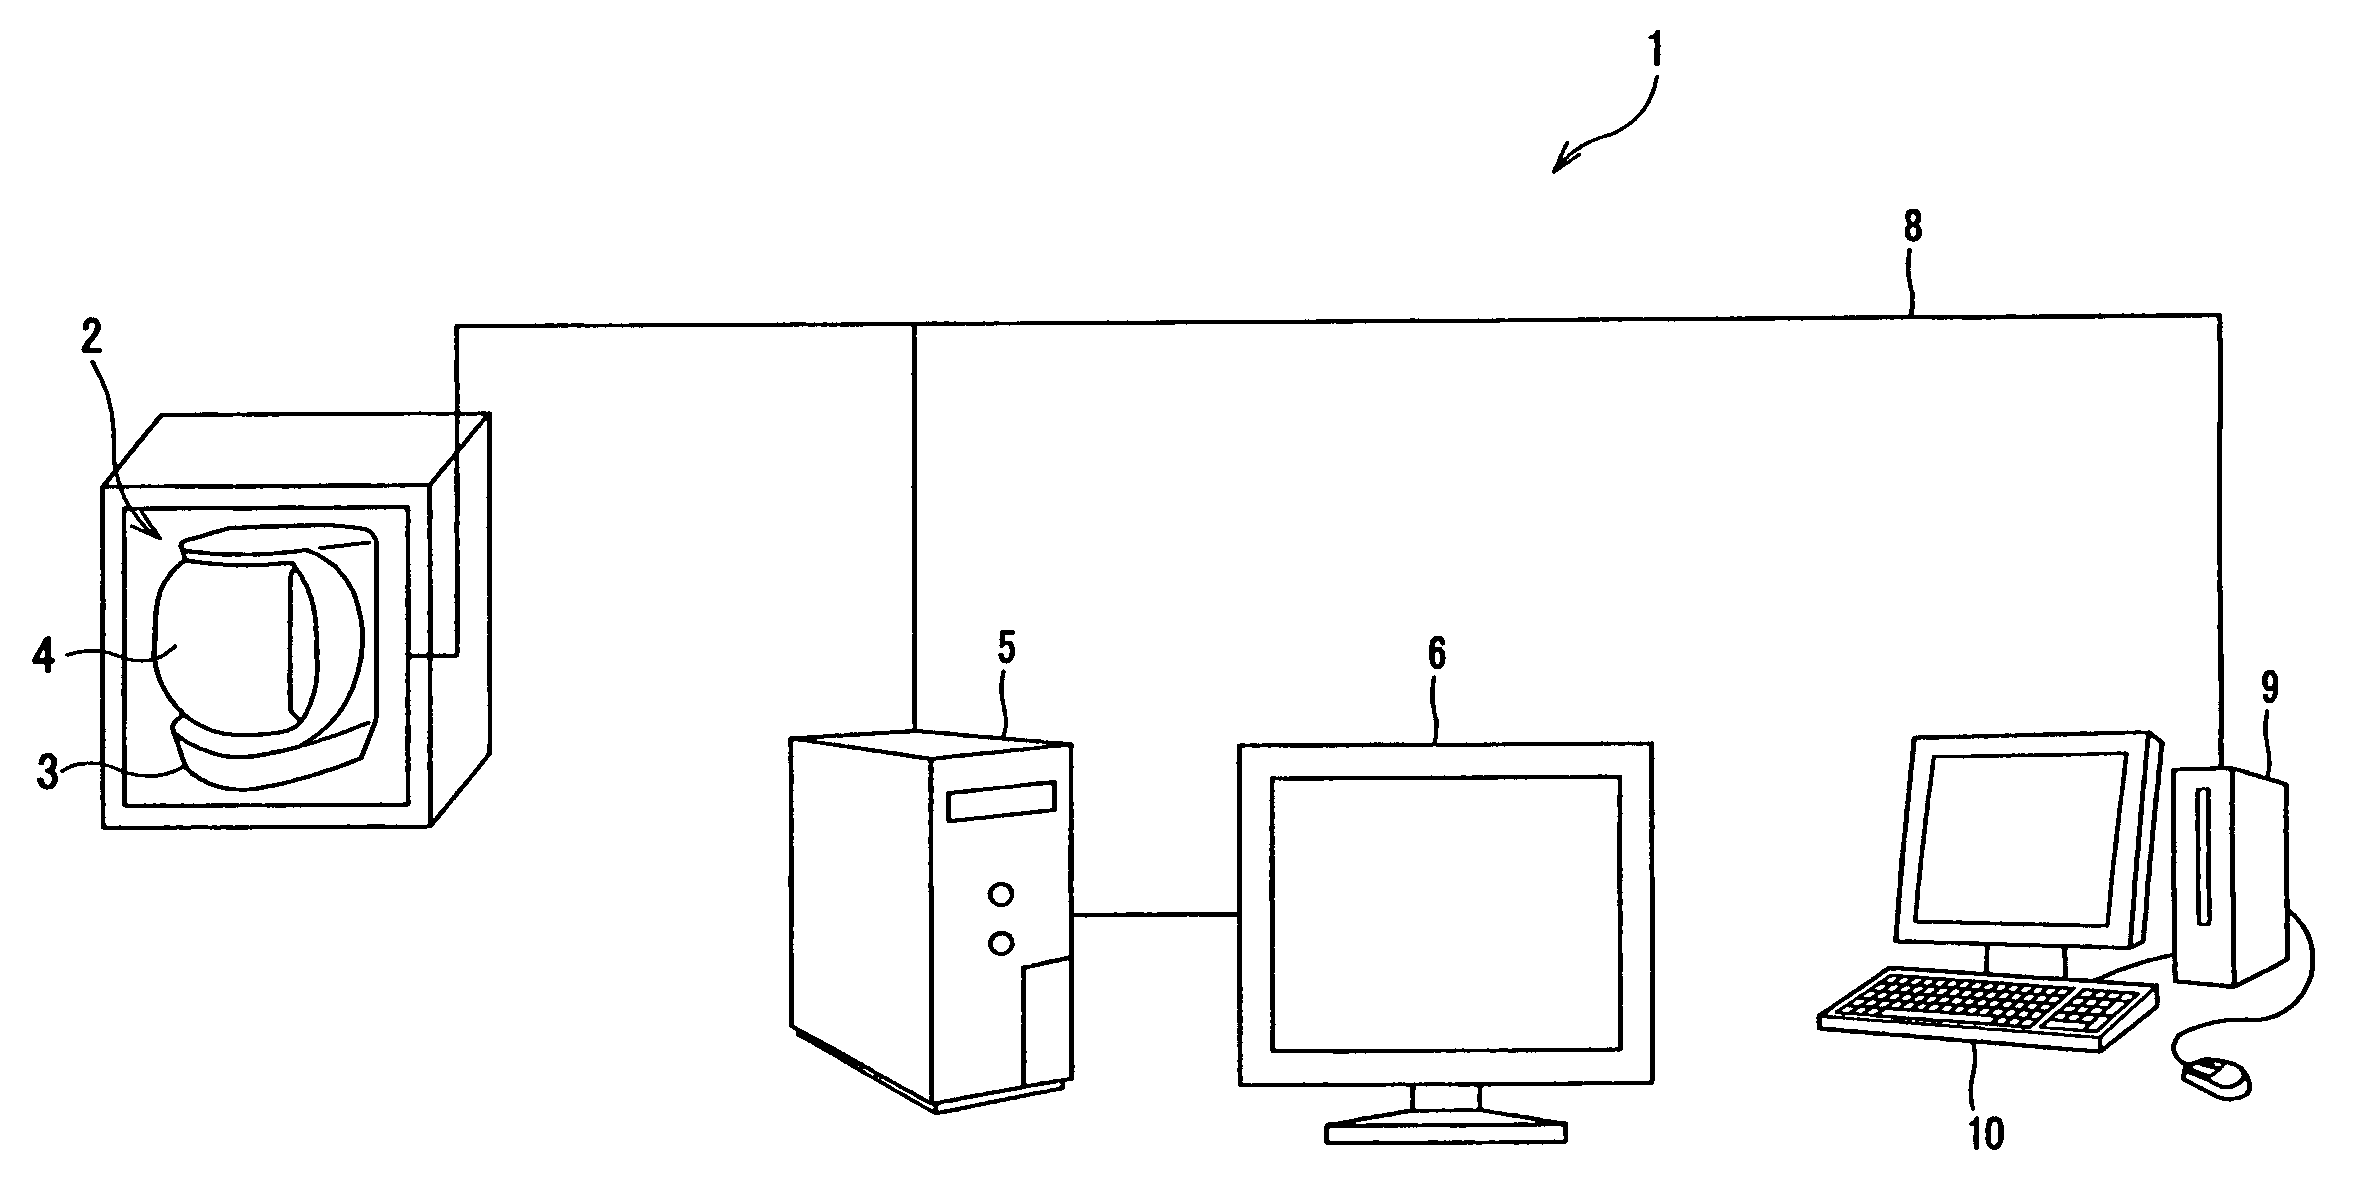 Imaging device and method, computer program product on computer-readable medium, and imaging system